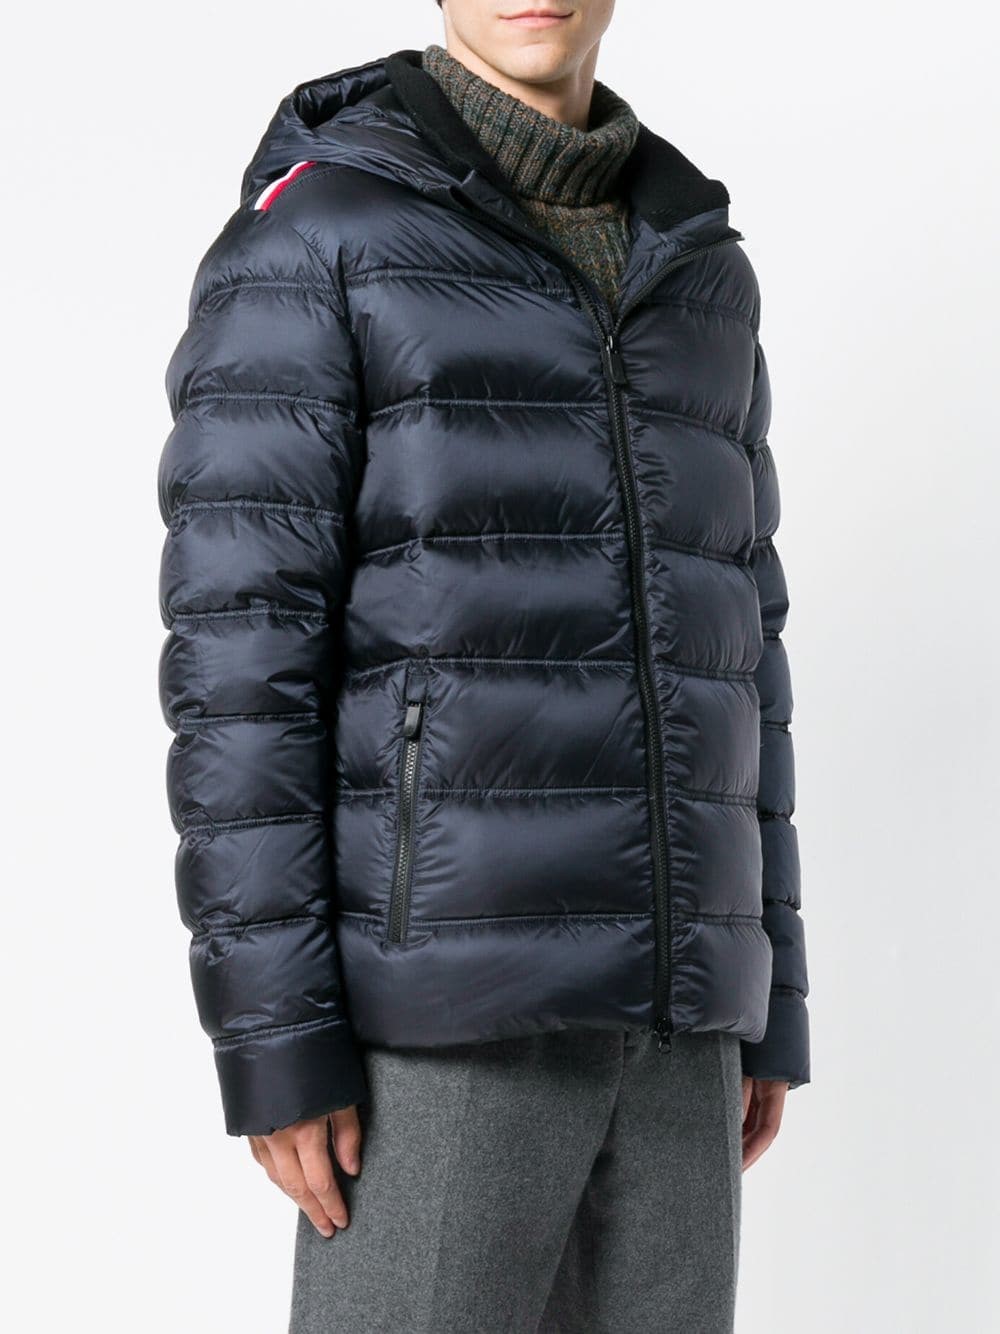 rossignol CESAR JACKET available on montiboutique.com - 24880